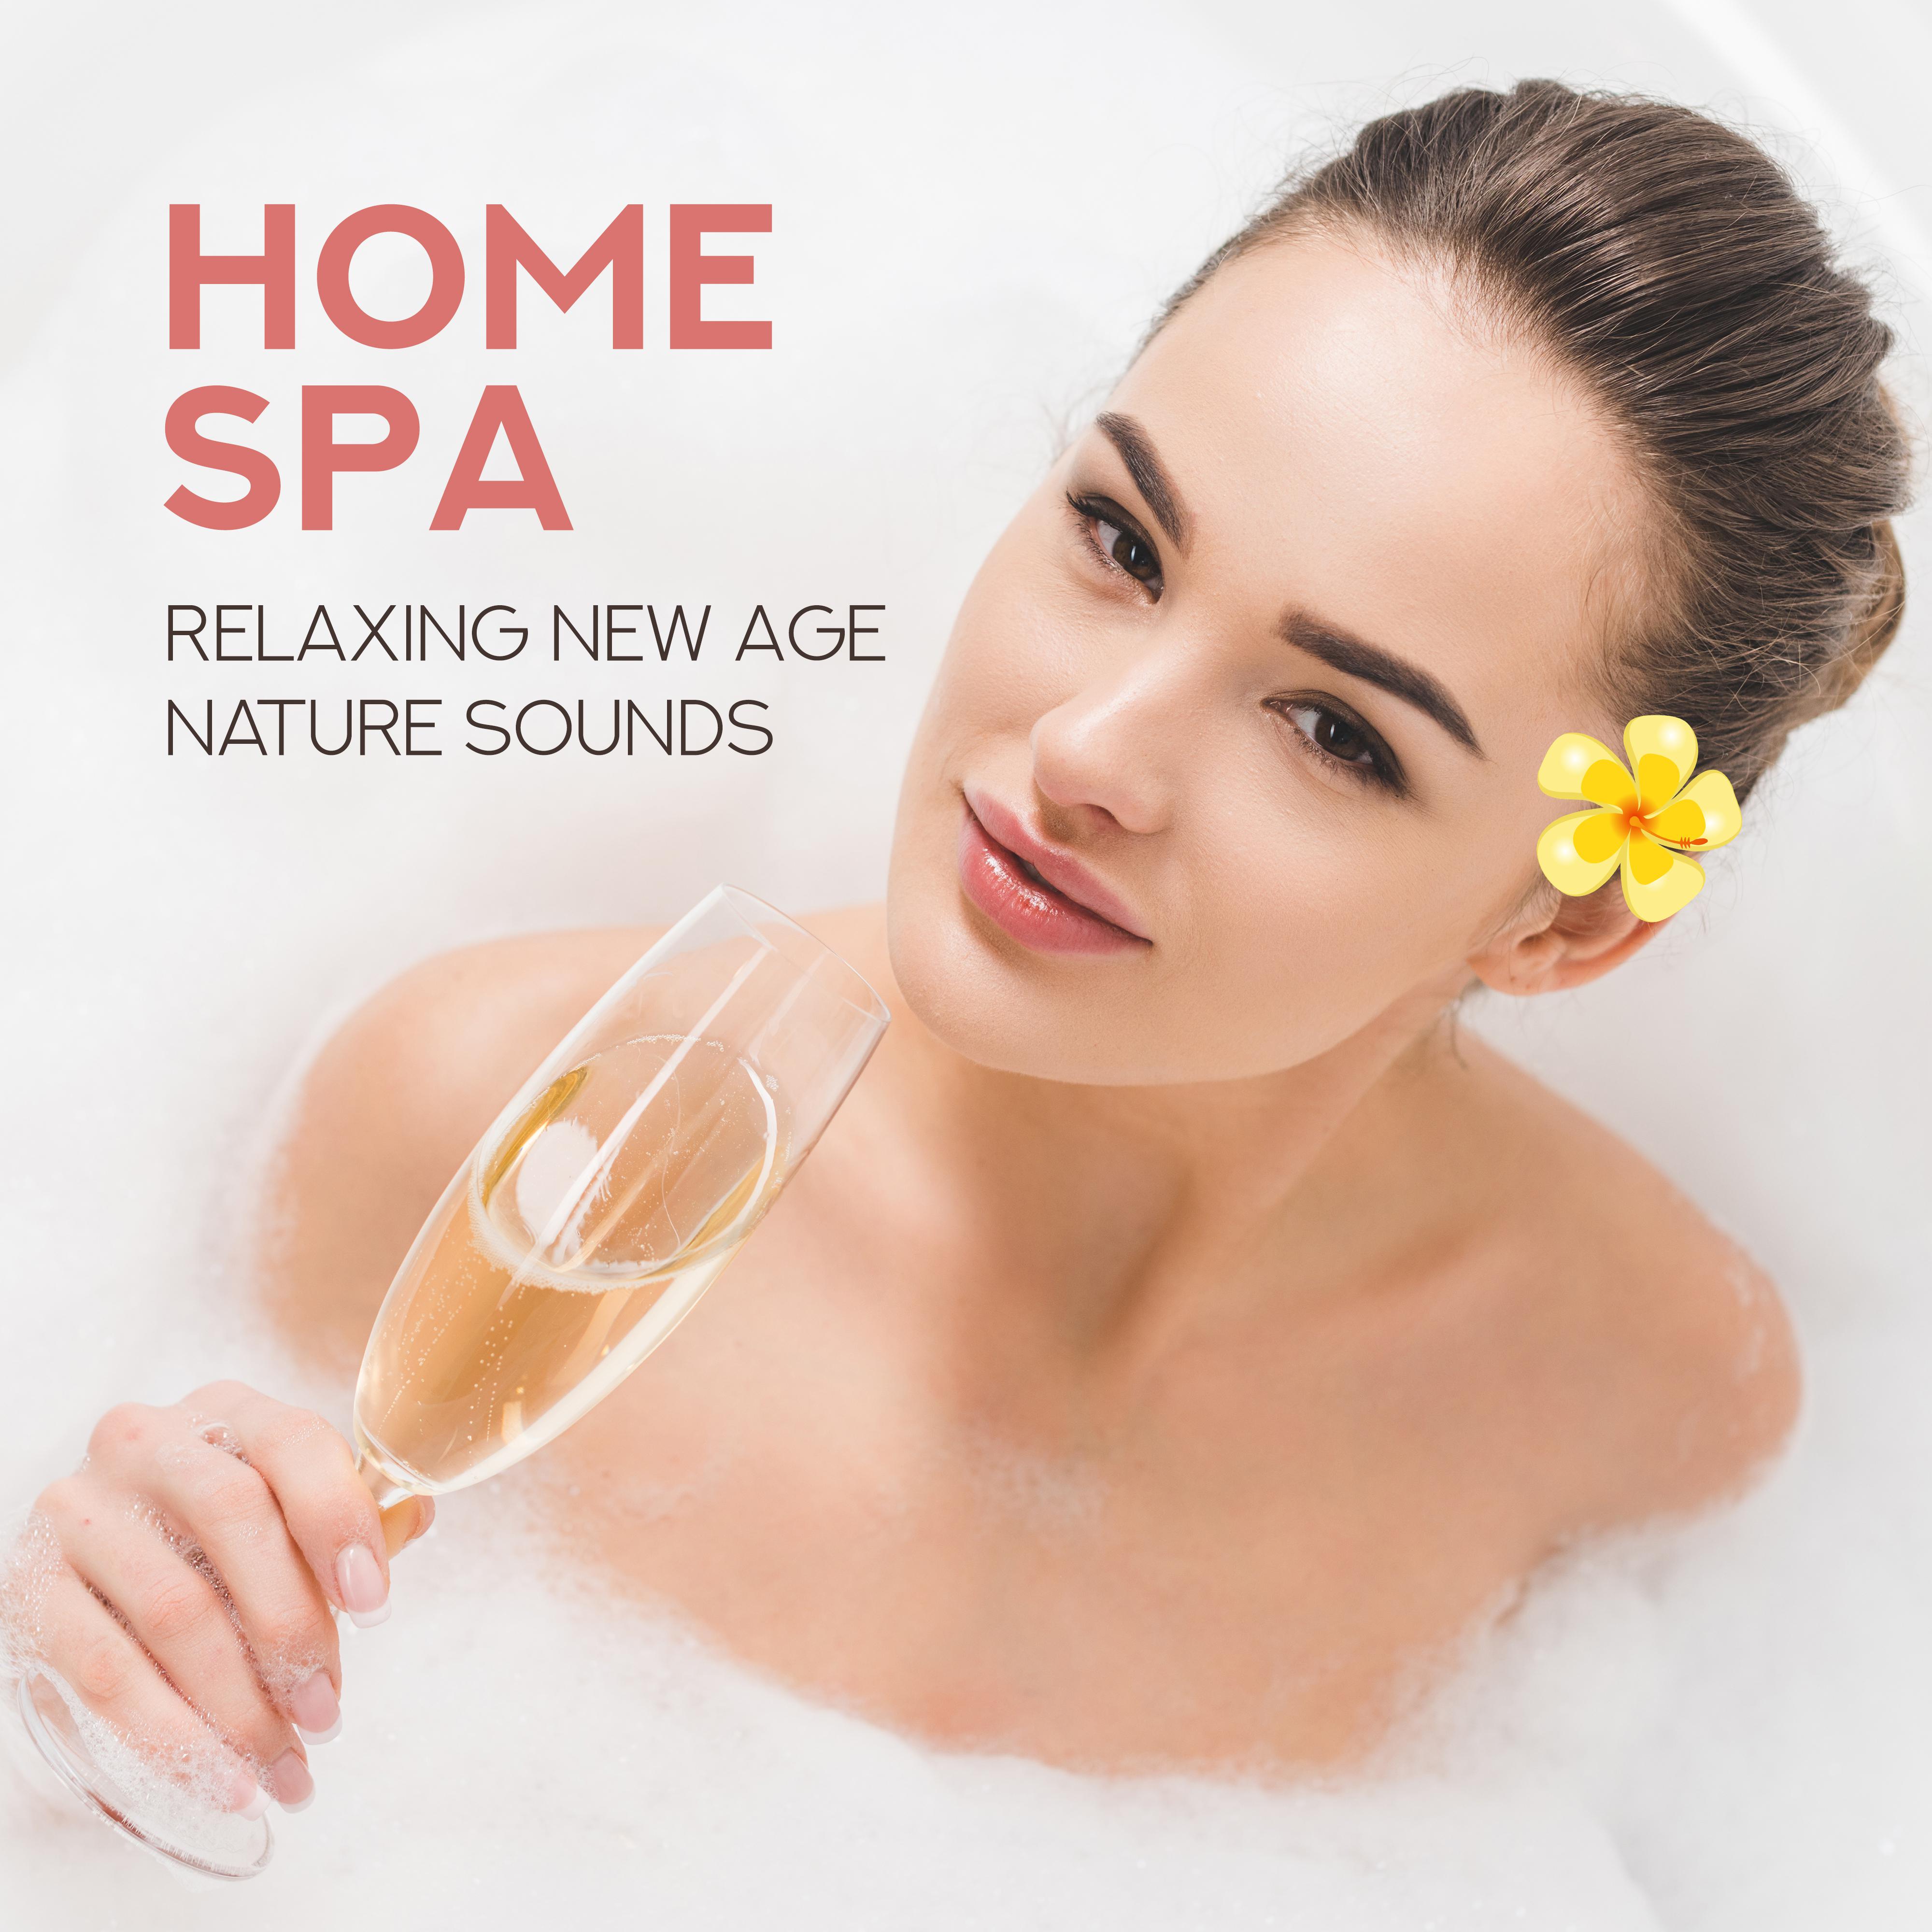 Home Spa Relaxing New Age Nature Sounds